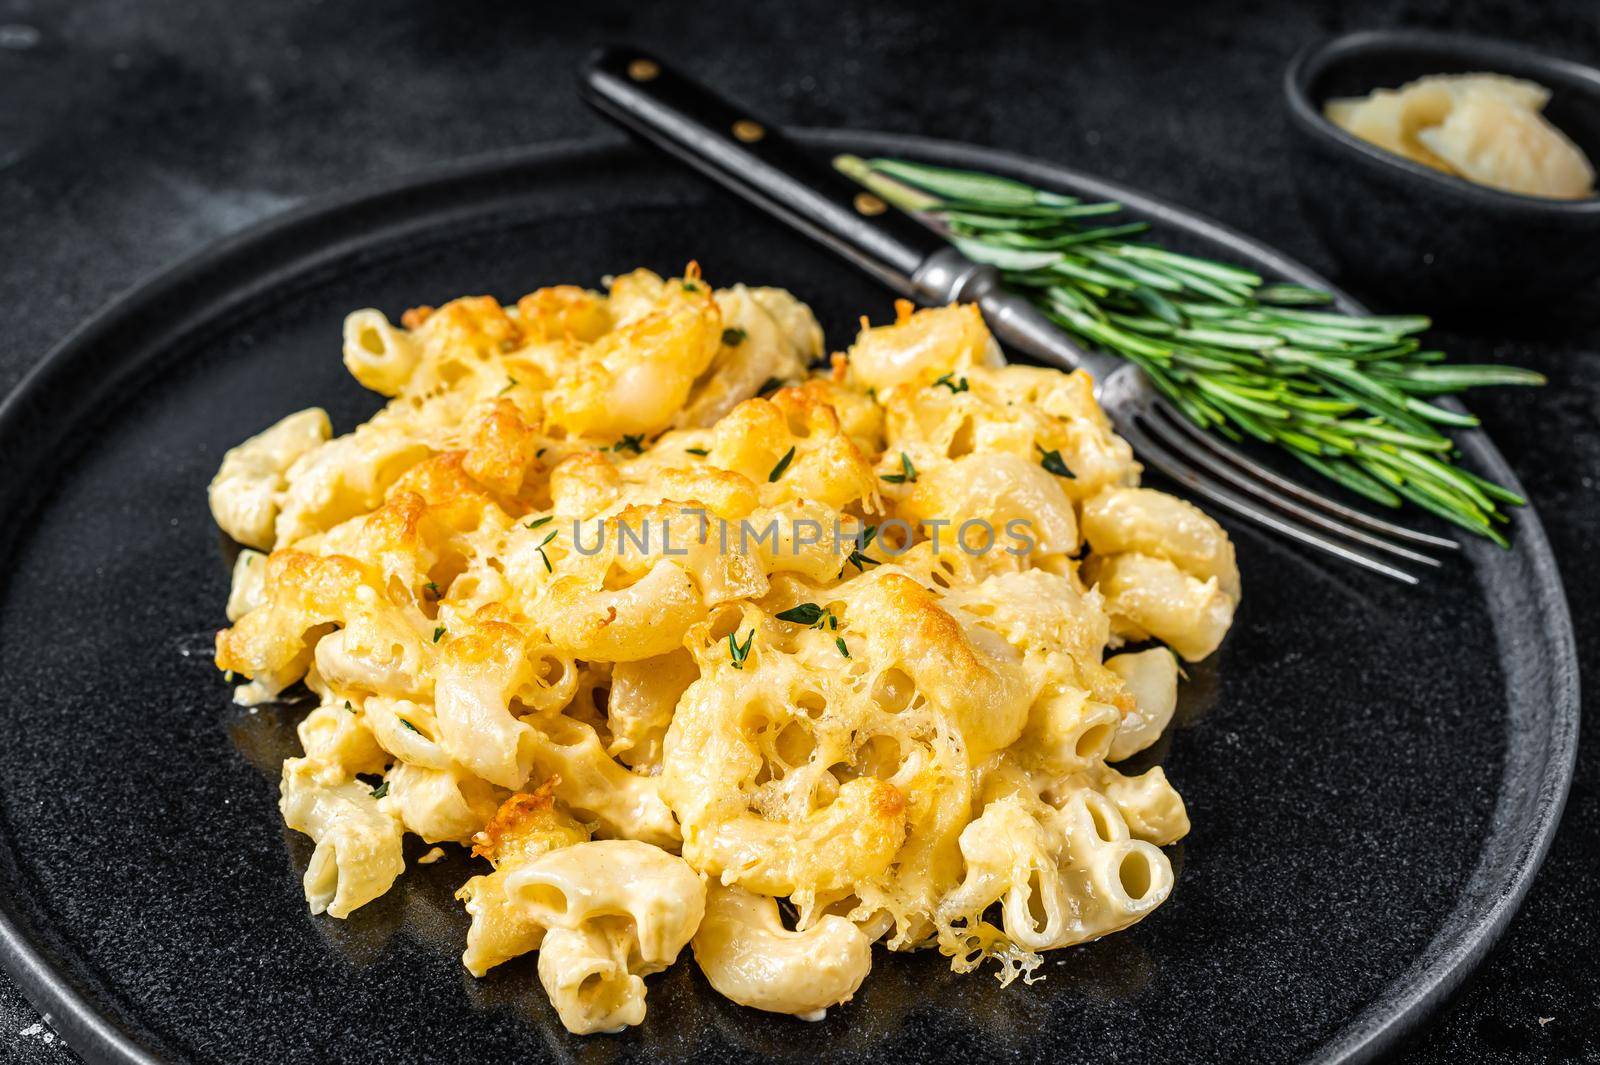 Baked Macaroni Mac and cheese American dish with Cheddar cheese sauce. Black background. Top view by Composter